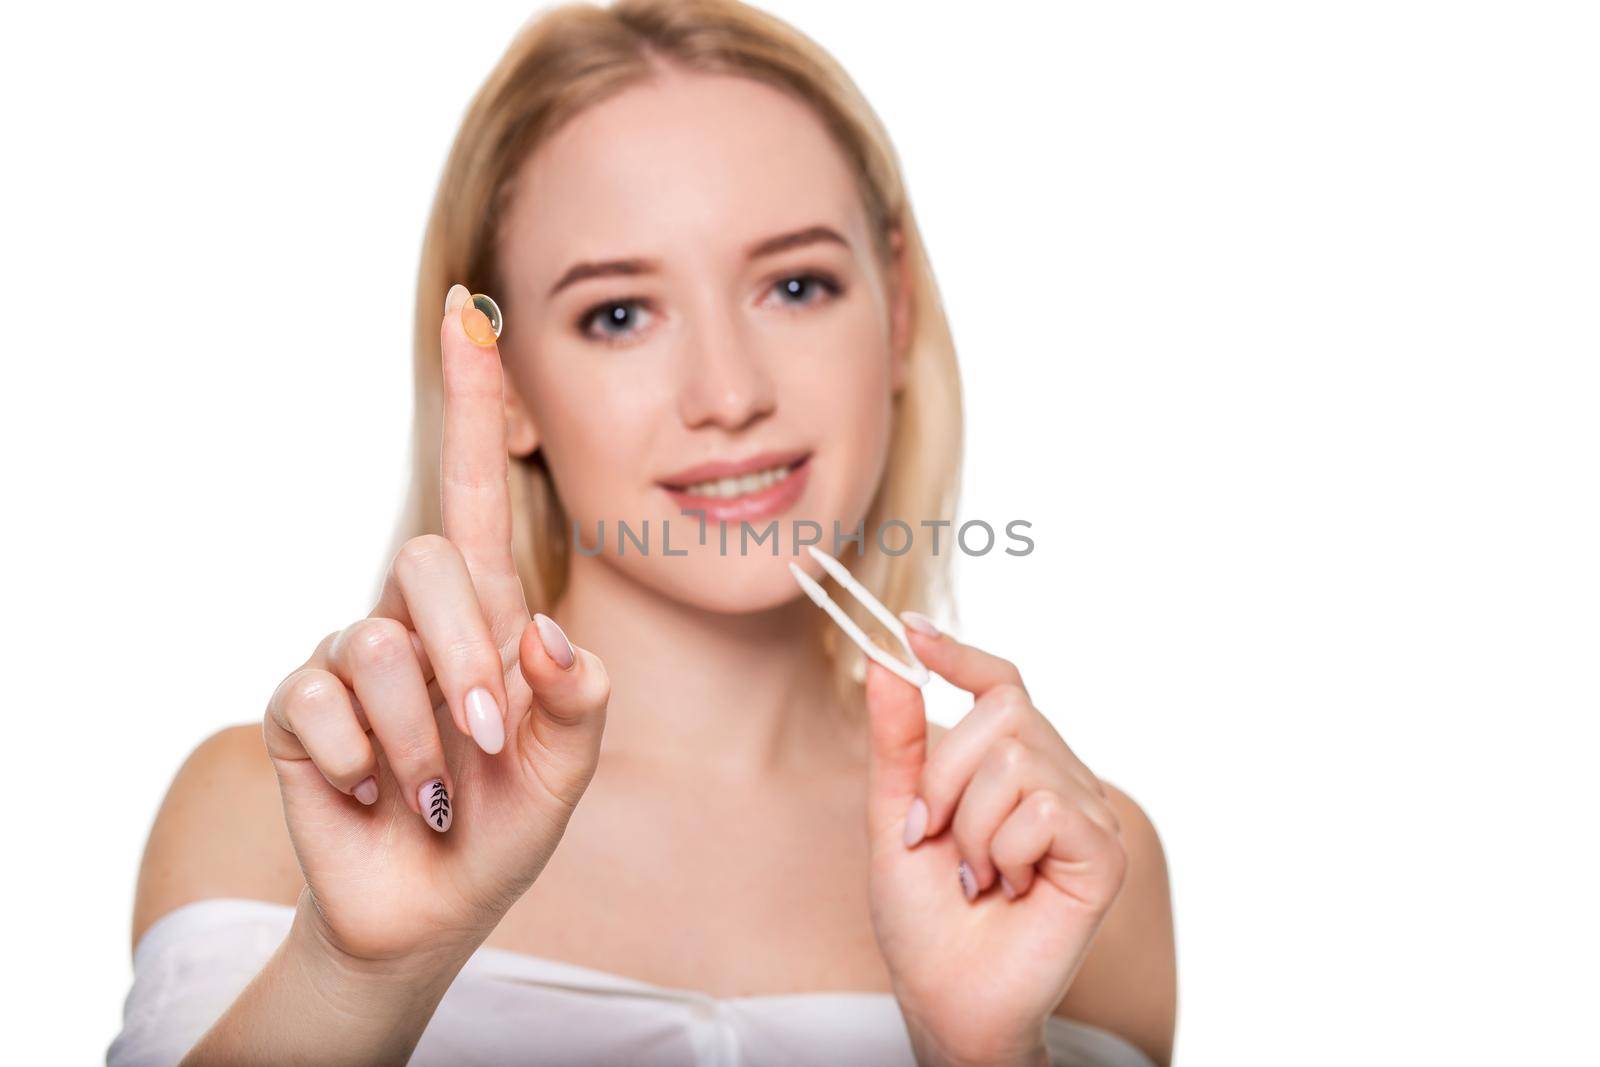 Focus on contact lens on finger of young woman. Young woman holding contact lens on finger in front of her face. Woman holding contact lens on white background. Eyesight and eyecare concept.